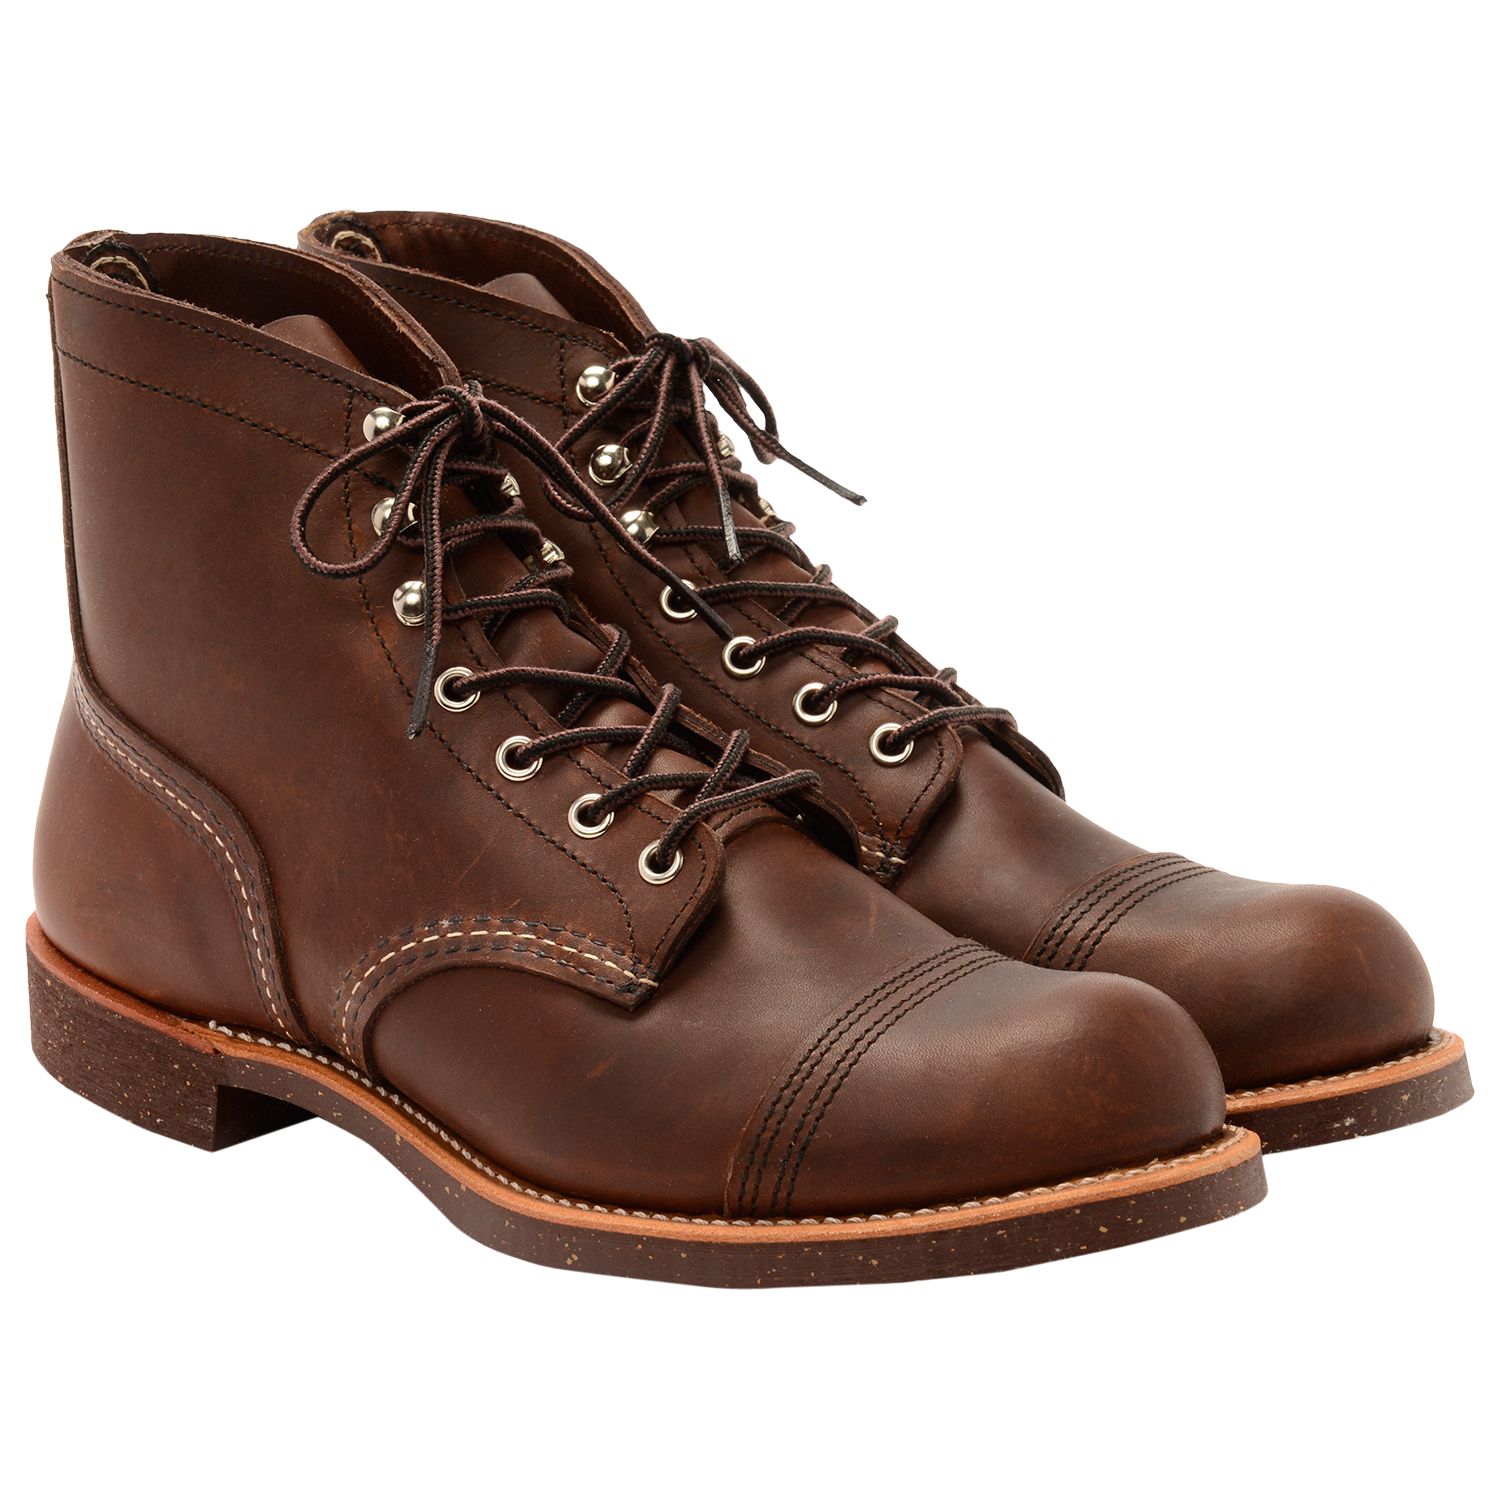 Red Wing 8111 Iron Ranger Boots, Amber Harness, 7